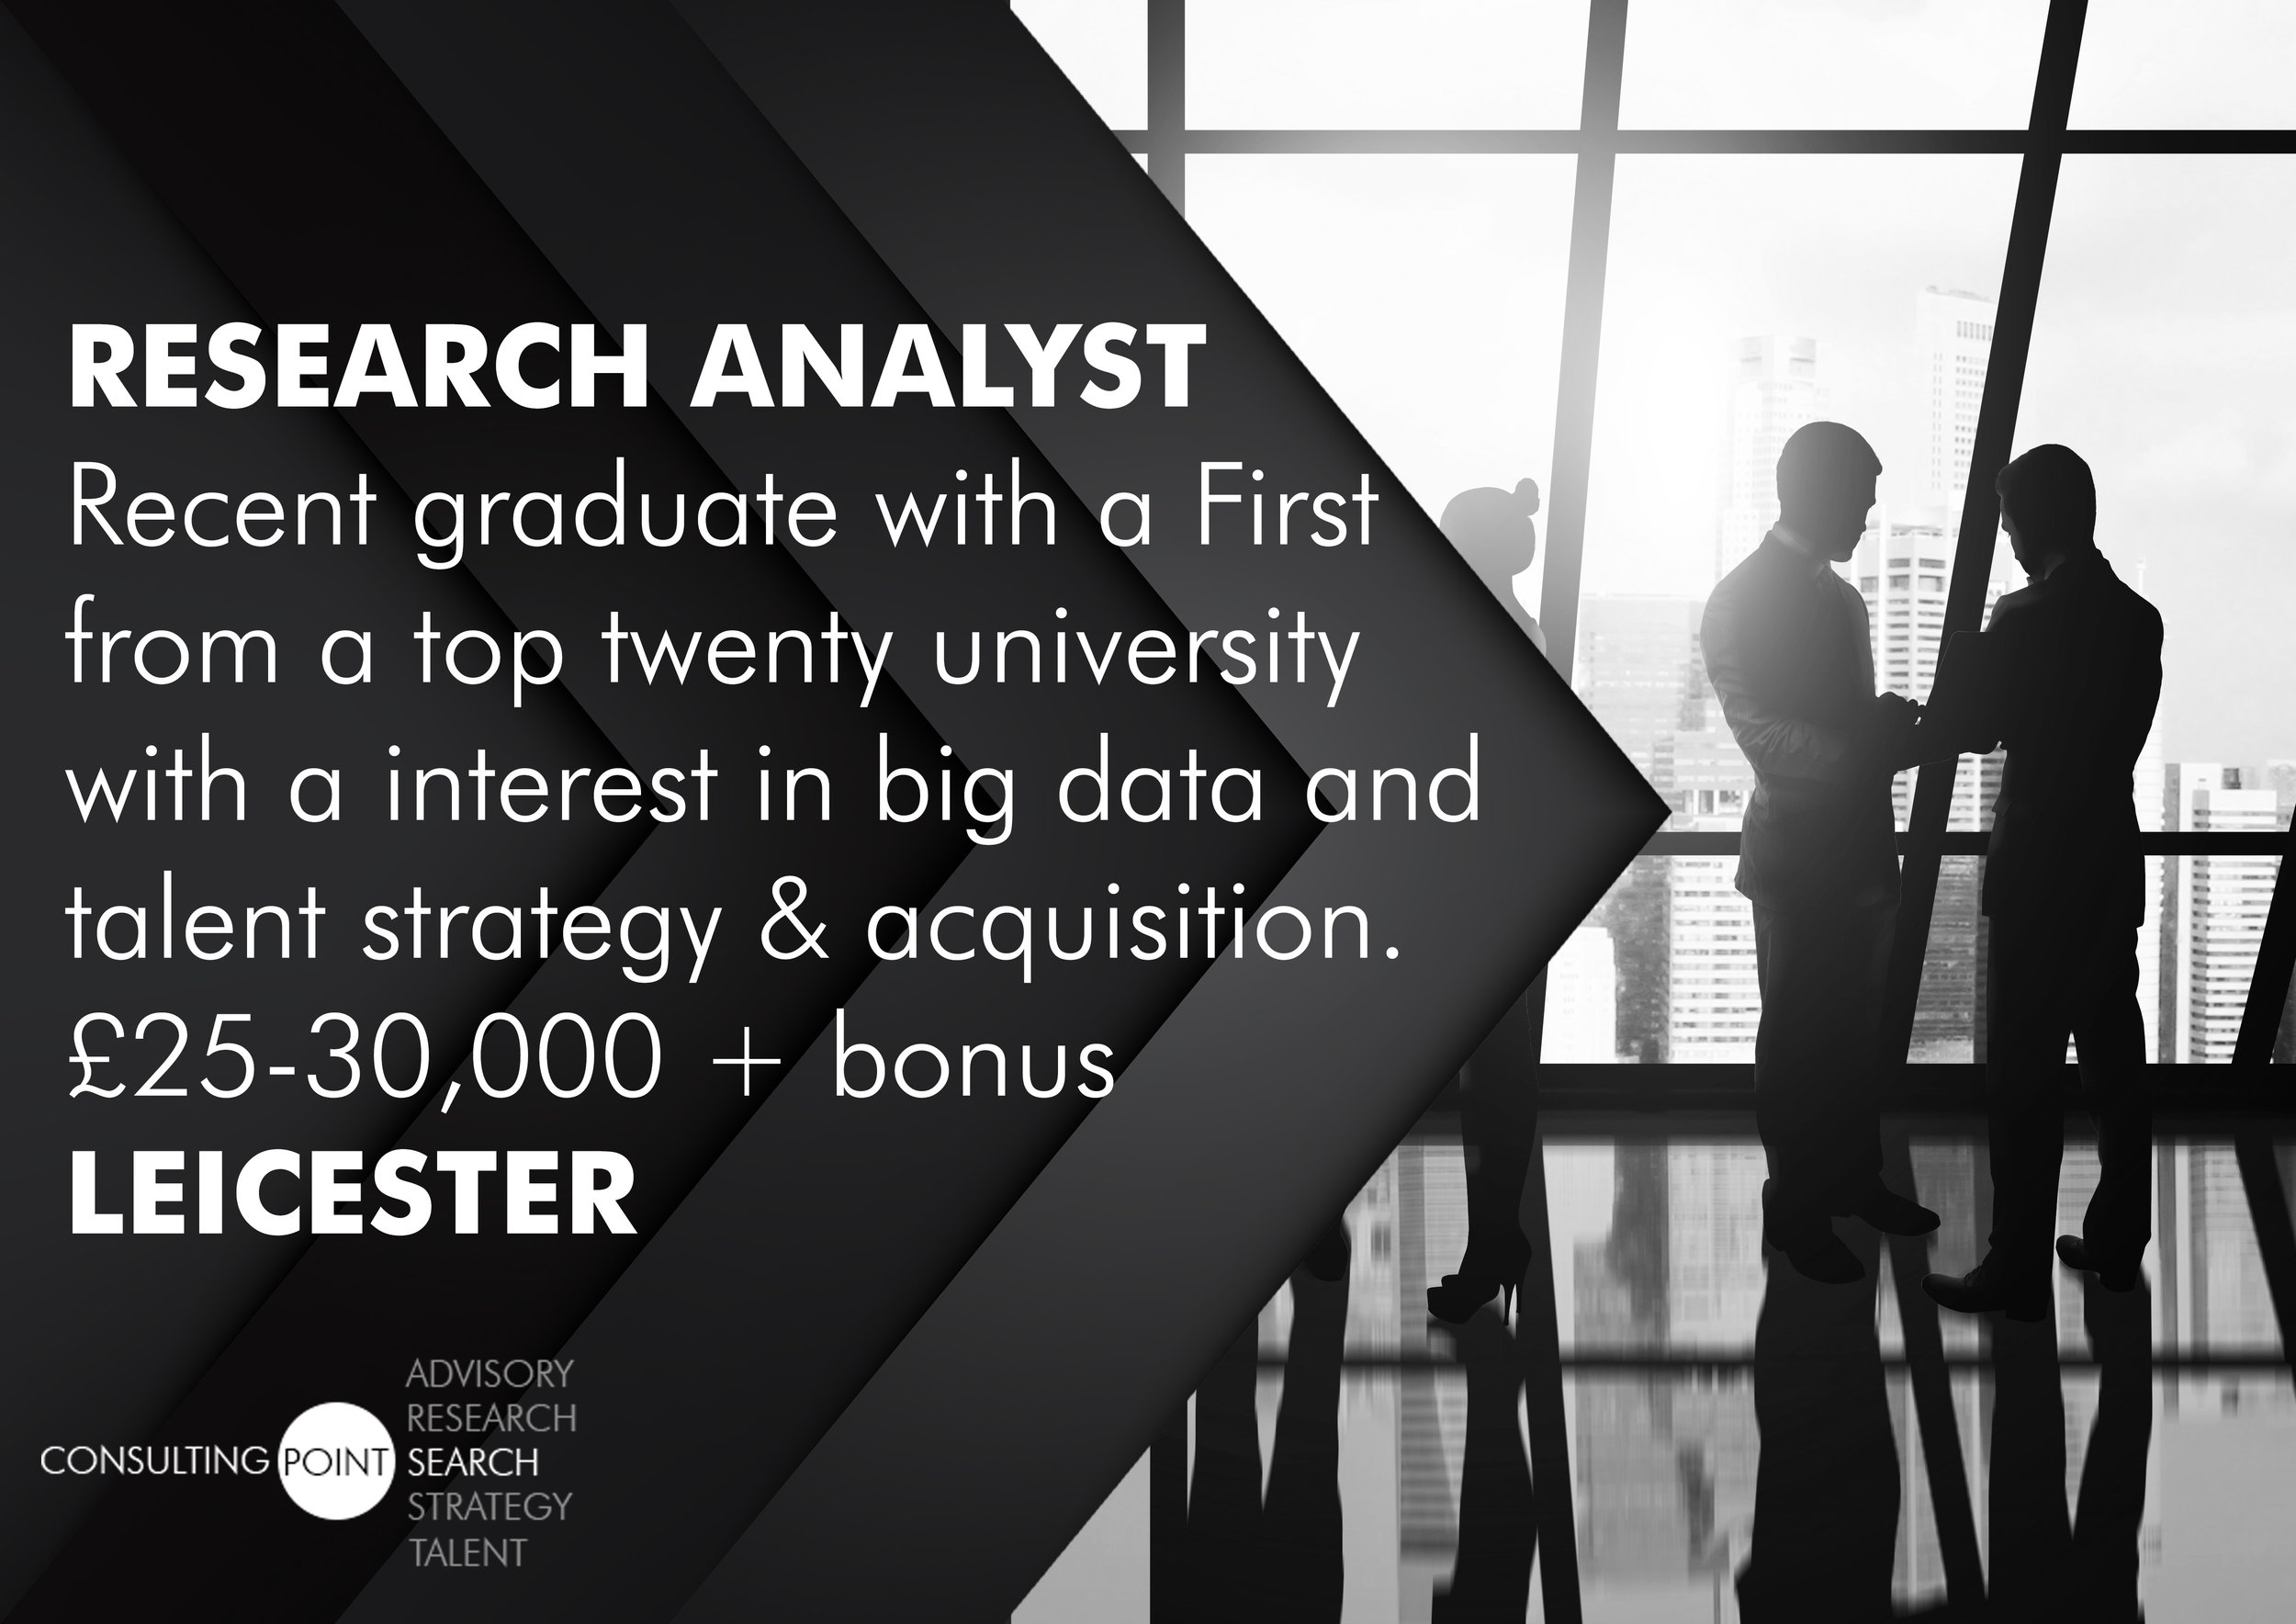 Research Analyst - Leicester.jpg